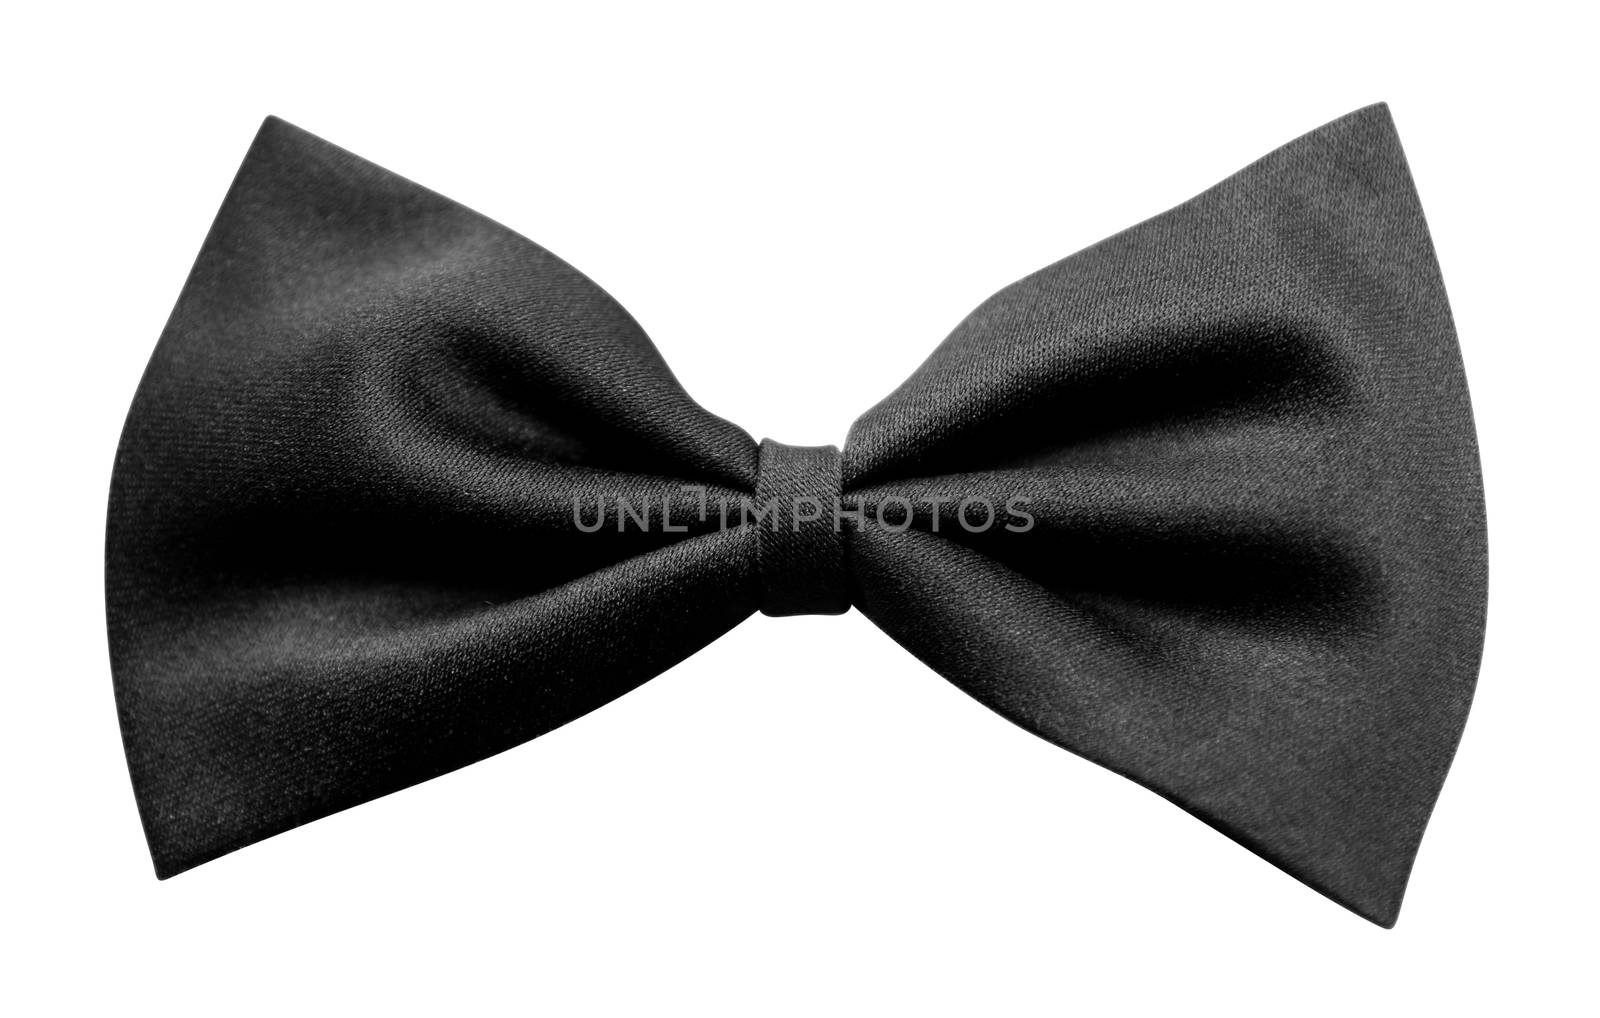 Black bow tie, isolated on white background. Clipping path included.